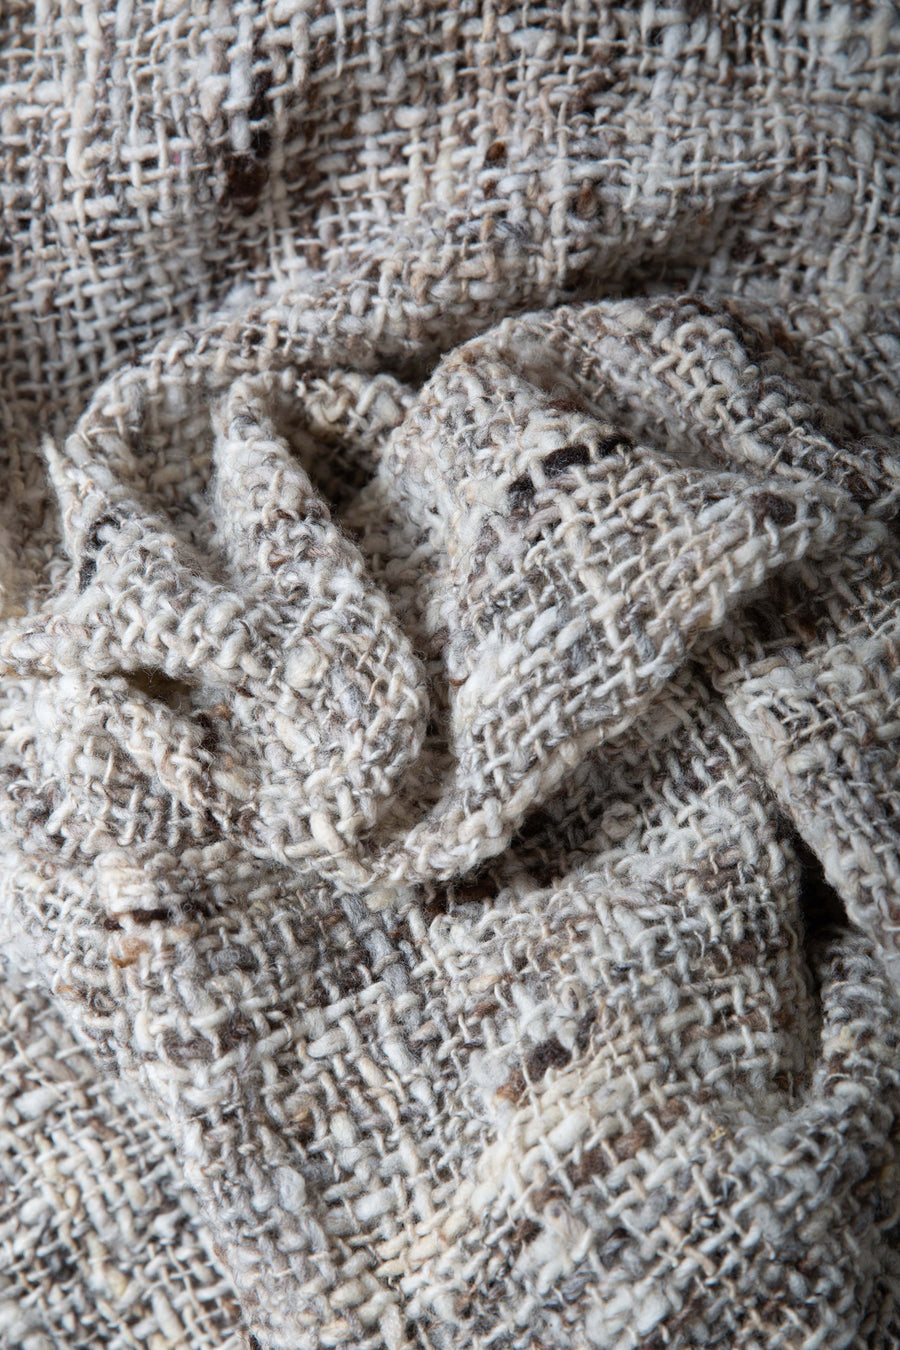 This is a close-up on just the woven shawl, showing the detailed texture of the weave. Each thread is a unique color and thickness.